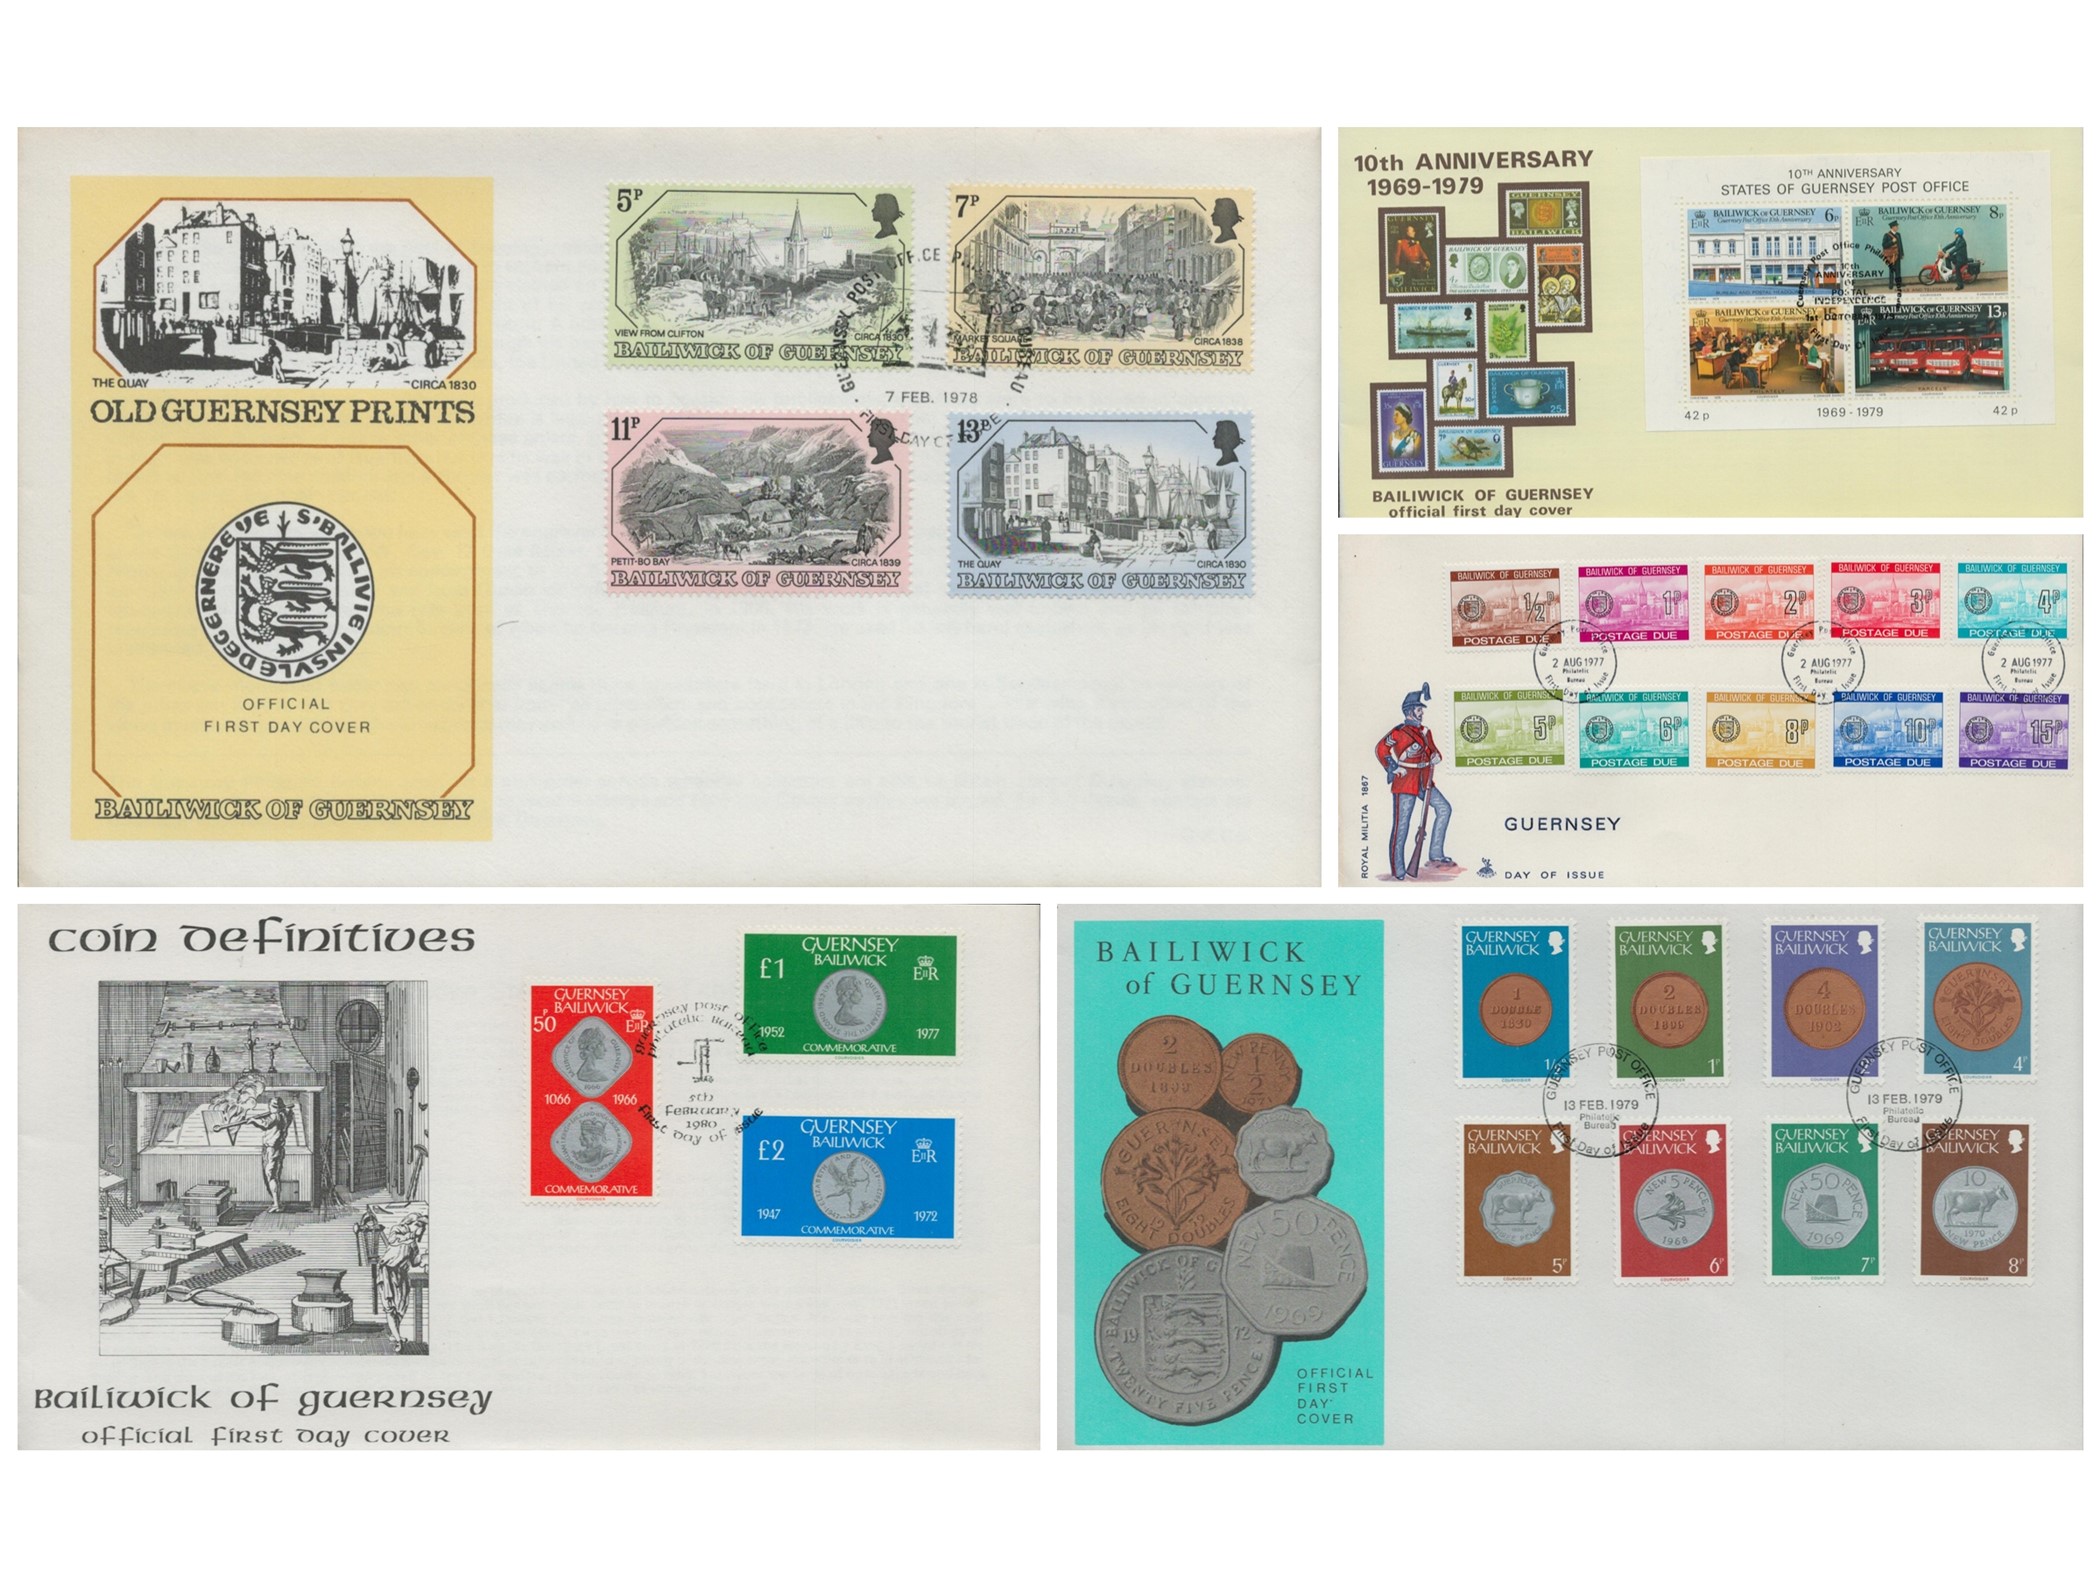 First Day cover Collection. 5 First Day Covers includes 10th Anniversary 1969-1979 Bailiwick of